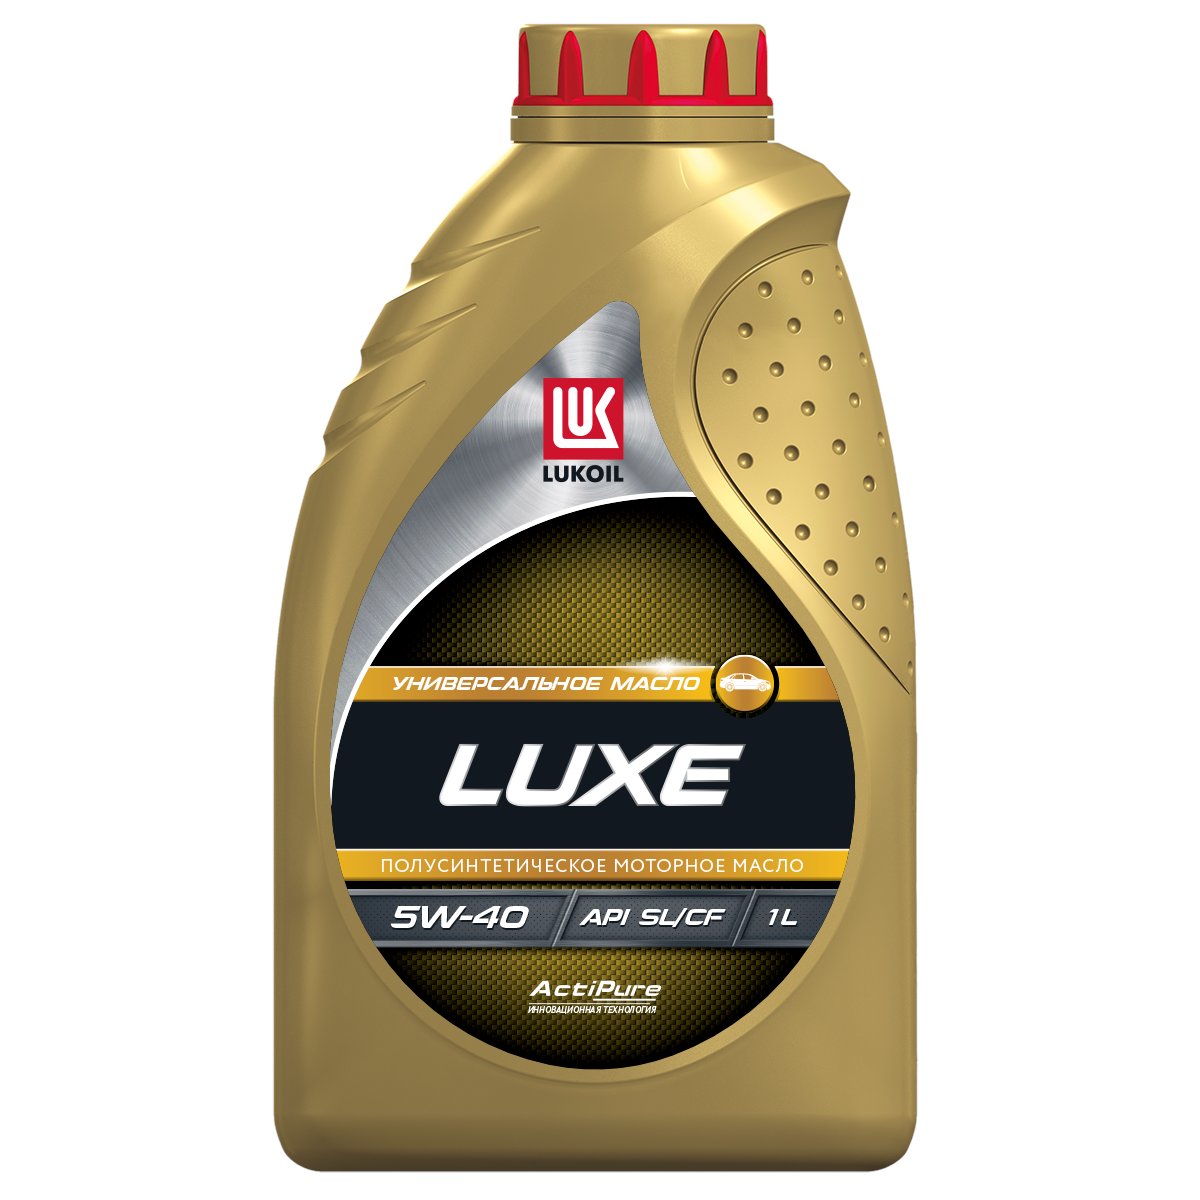 Масло моторное LUKOIL LUXE SEMI-SYNTHETIC 5W-40, API SL/CF, 1 л